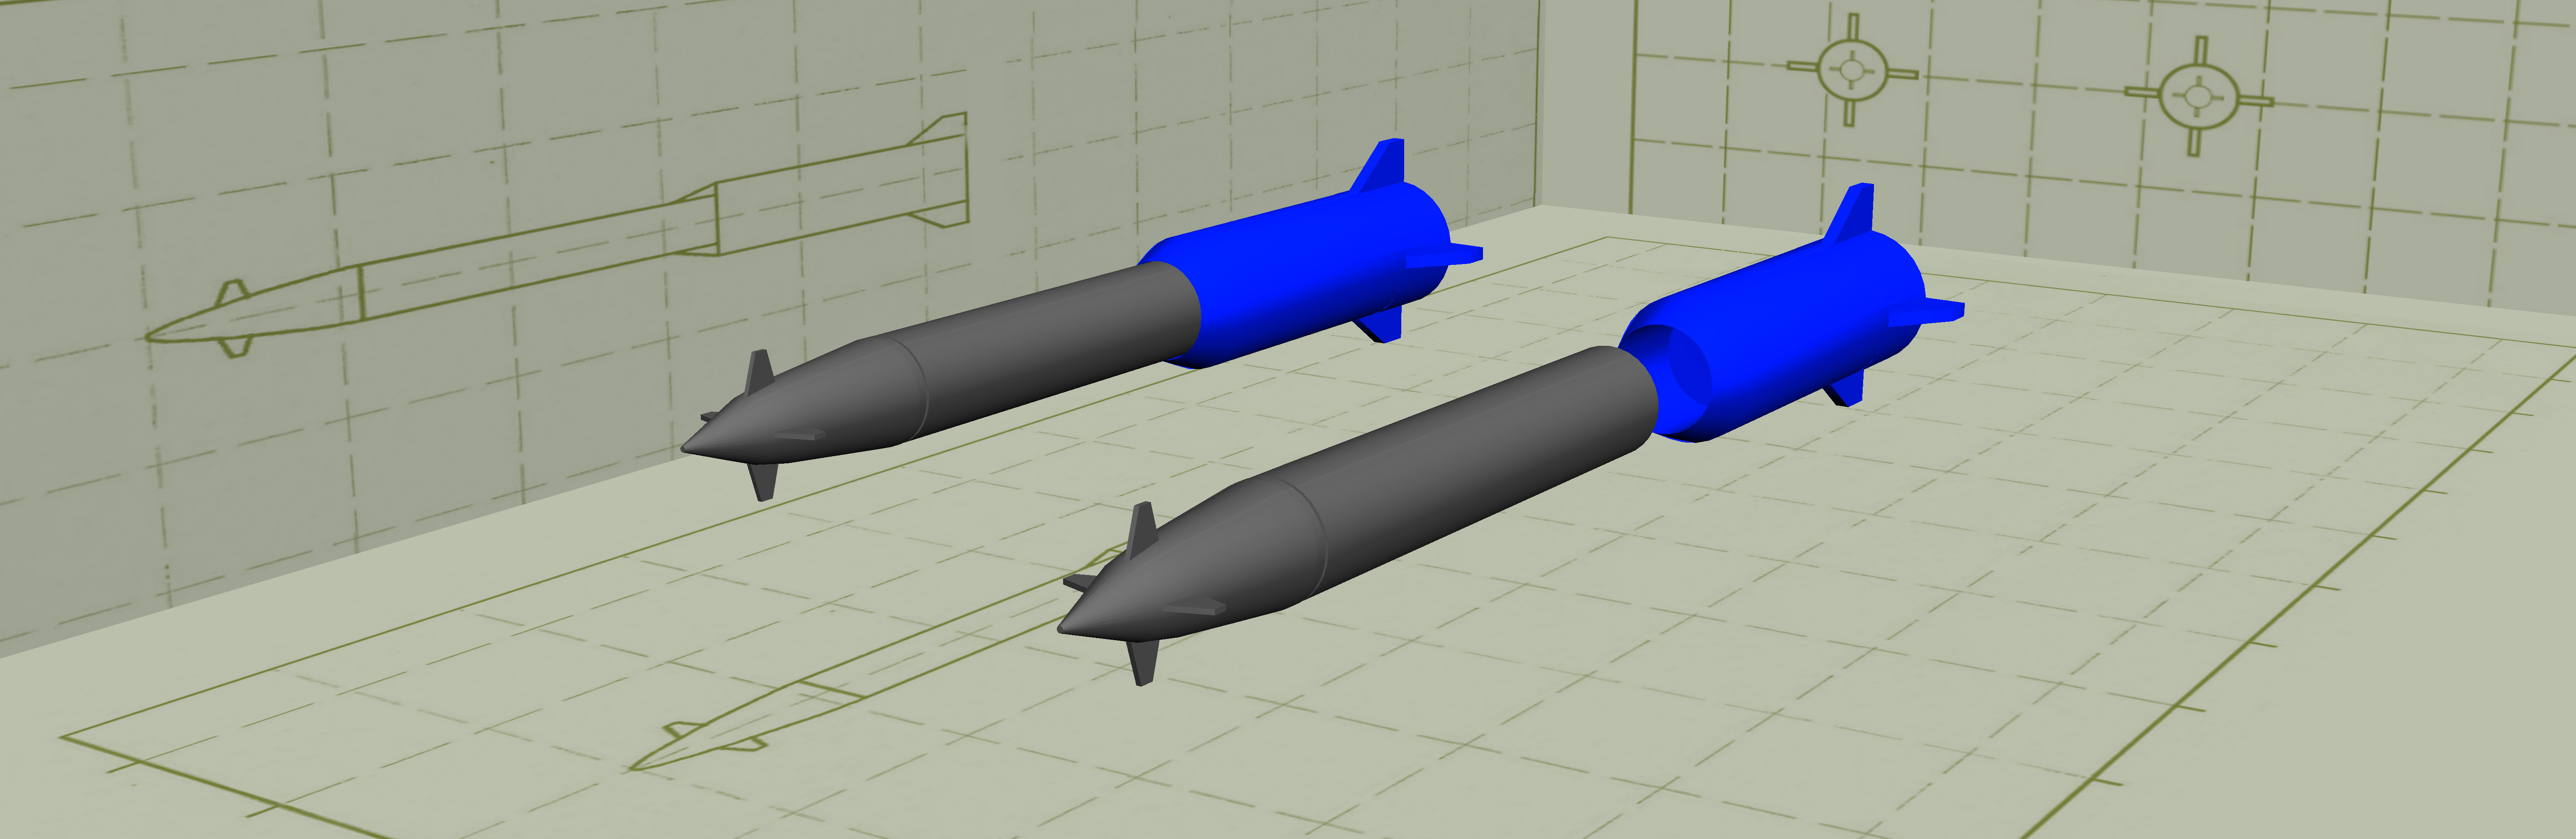 Graphic, 3D model of missiles